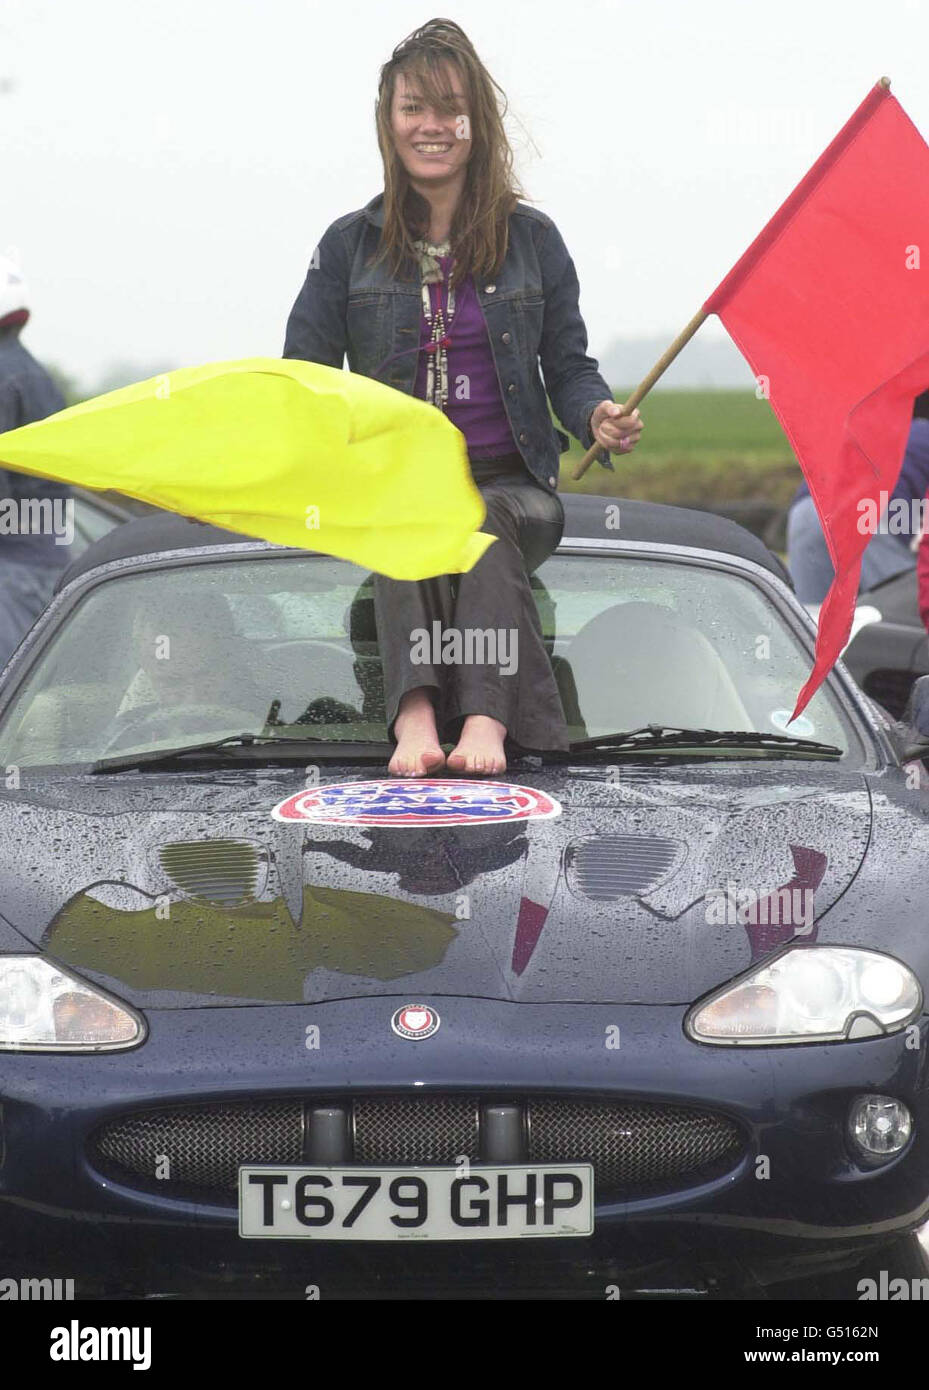 Socialite celebrity Tara Palmer-Tomkinson rides on the roof of a Jaguar XKR car with actor and musician 'Goldie' behind the wheel, at the Gumball 3000 rally at the Lotus Factory in Norfolk. Stock Photo